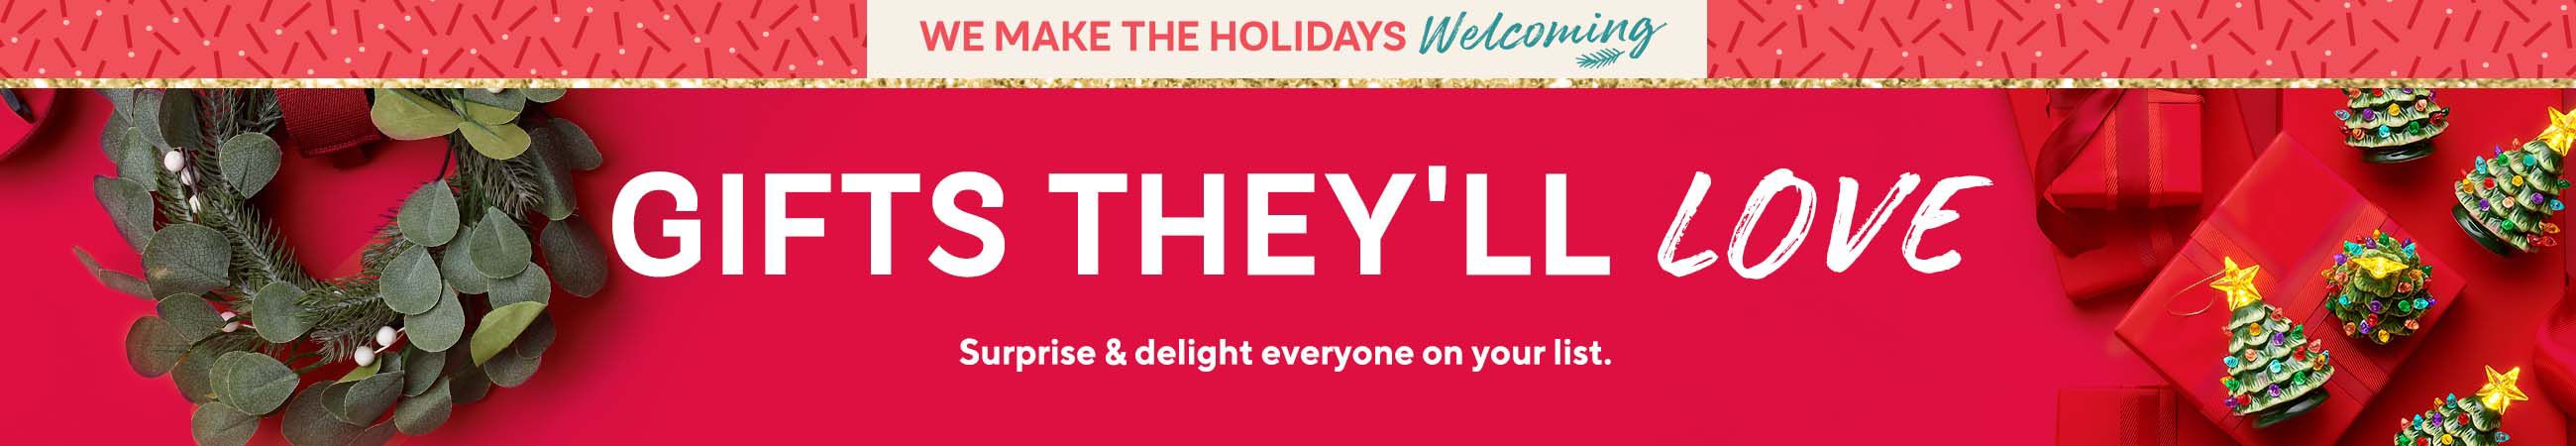 We Make the Holidays Welcoming.  Gifts They'll Love.  Surprise & delight everyone on your list.